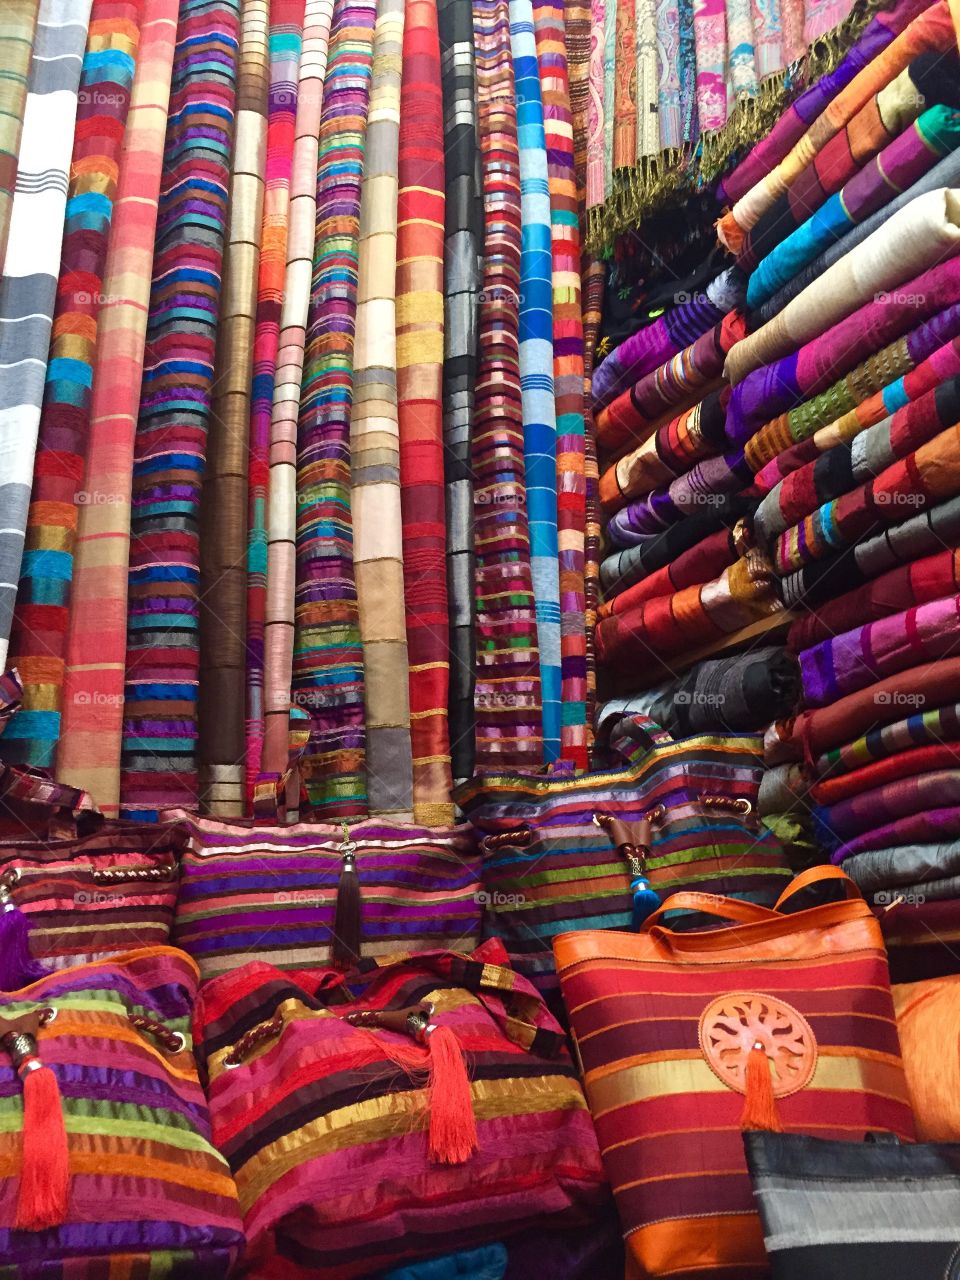 Items for sale at the souk in Marrakech 